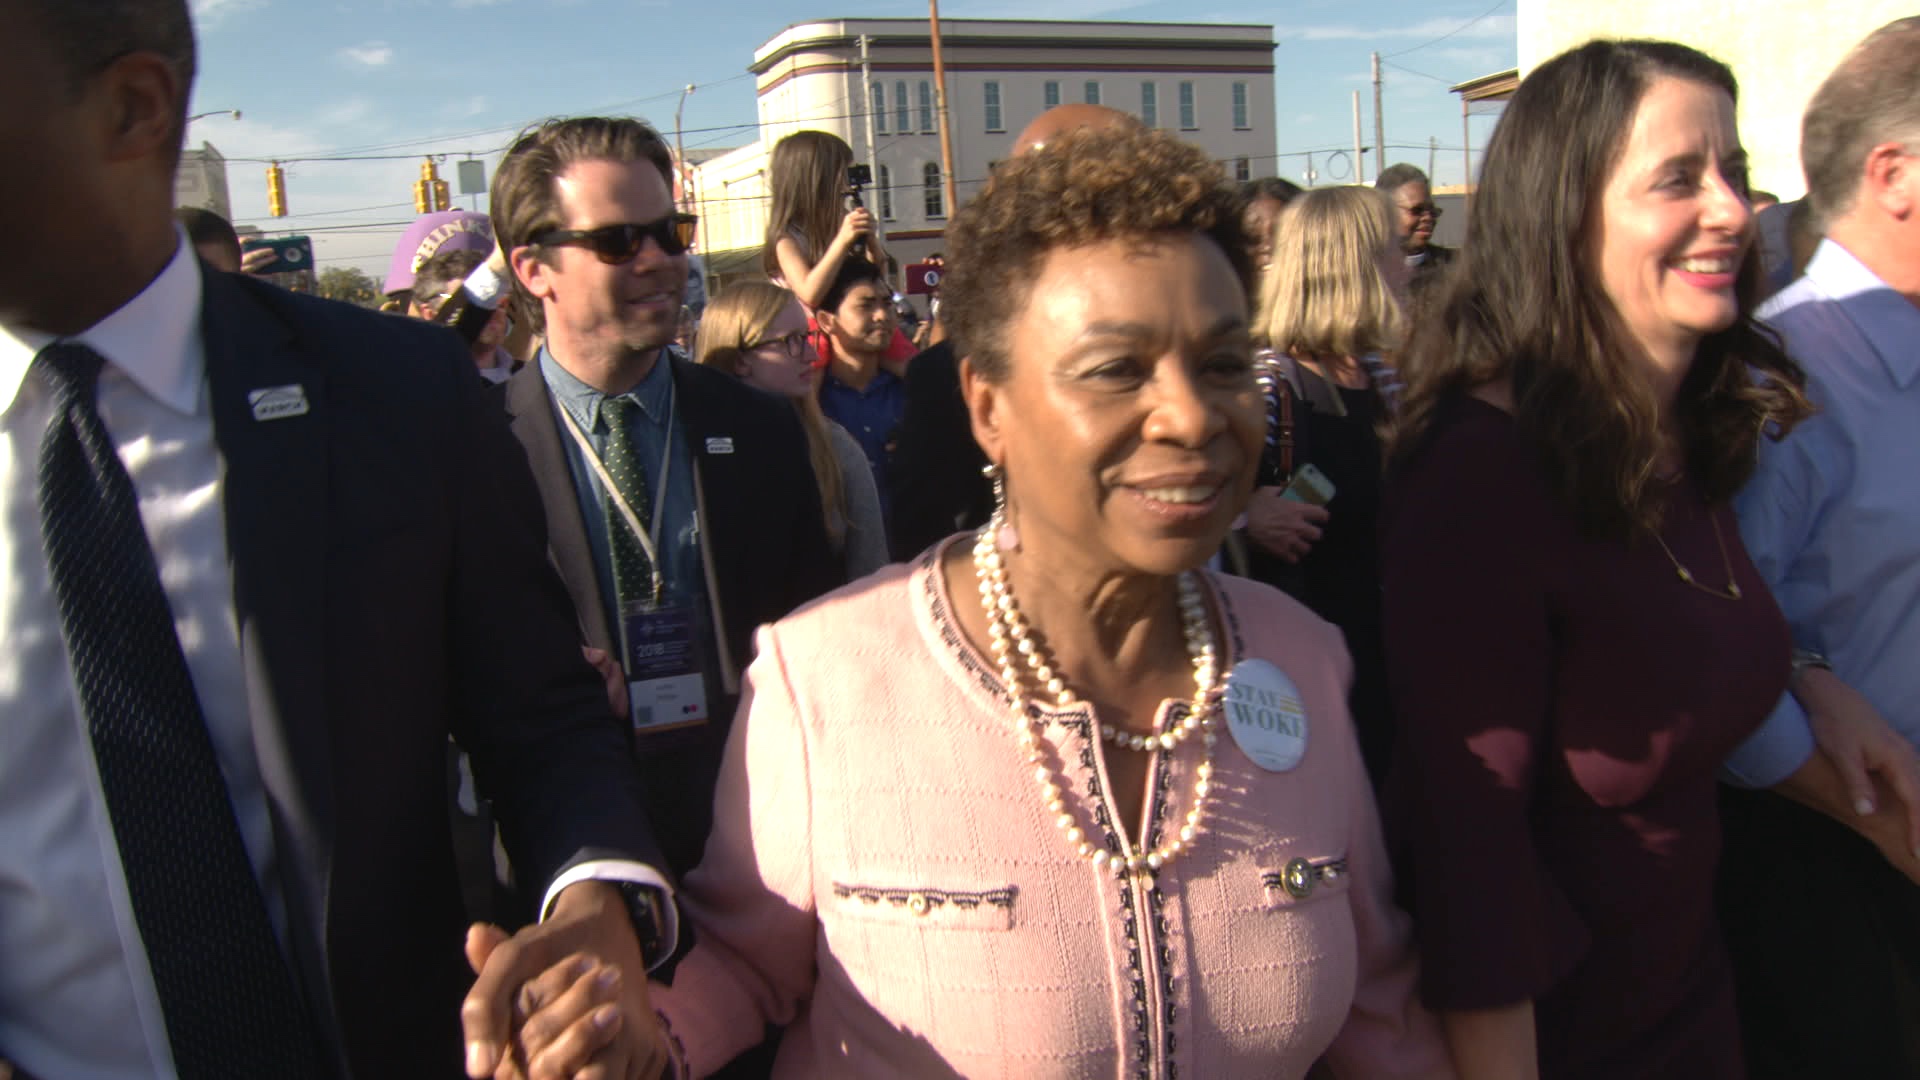 Truth to Power: Barbara Lee Speaks for Me